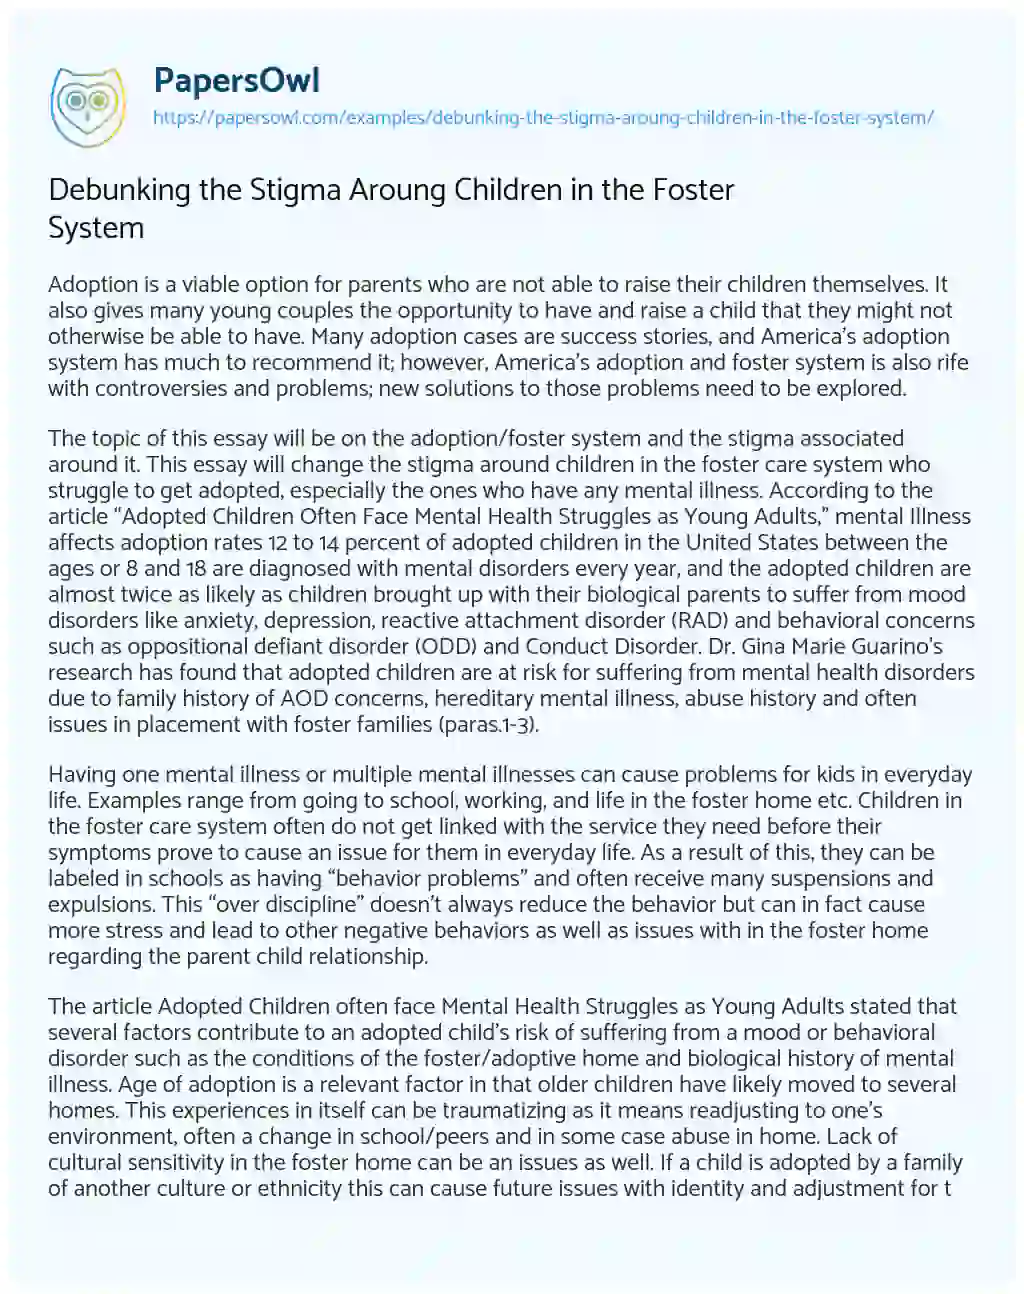 Essay on Debunking the Stigma Aroung Children in the Foster System